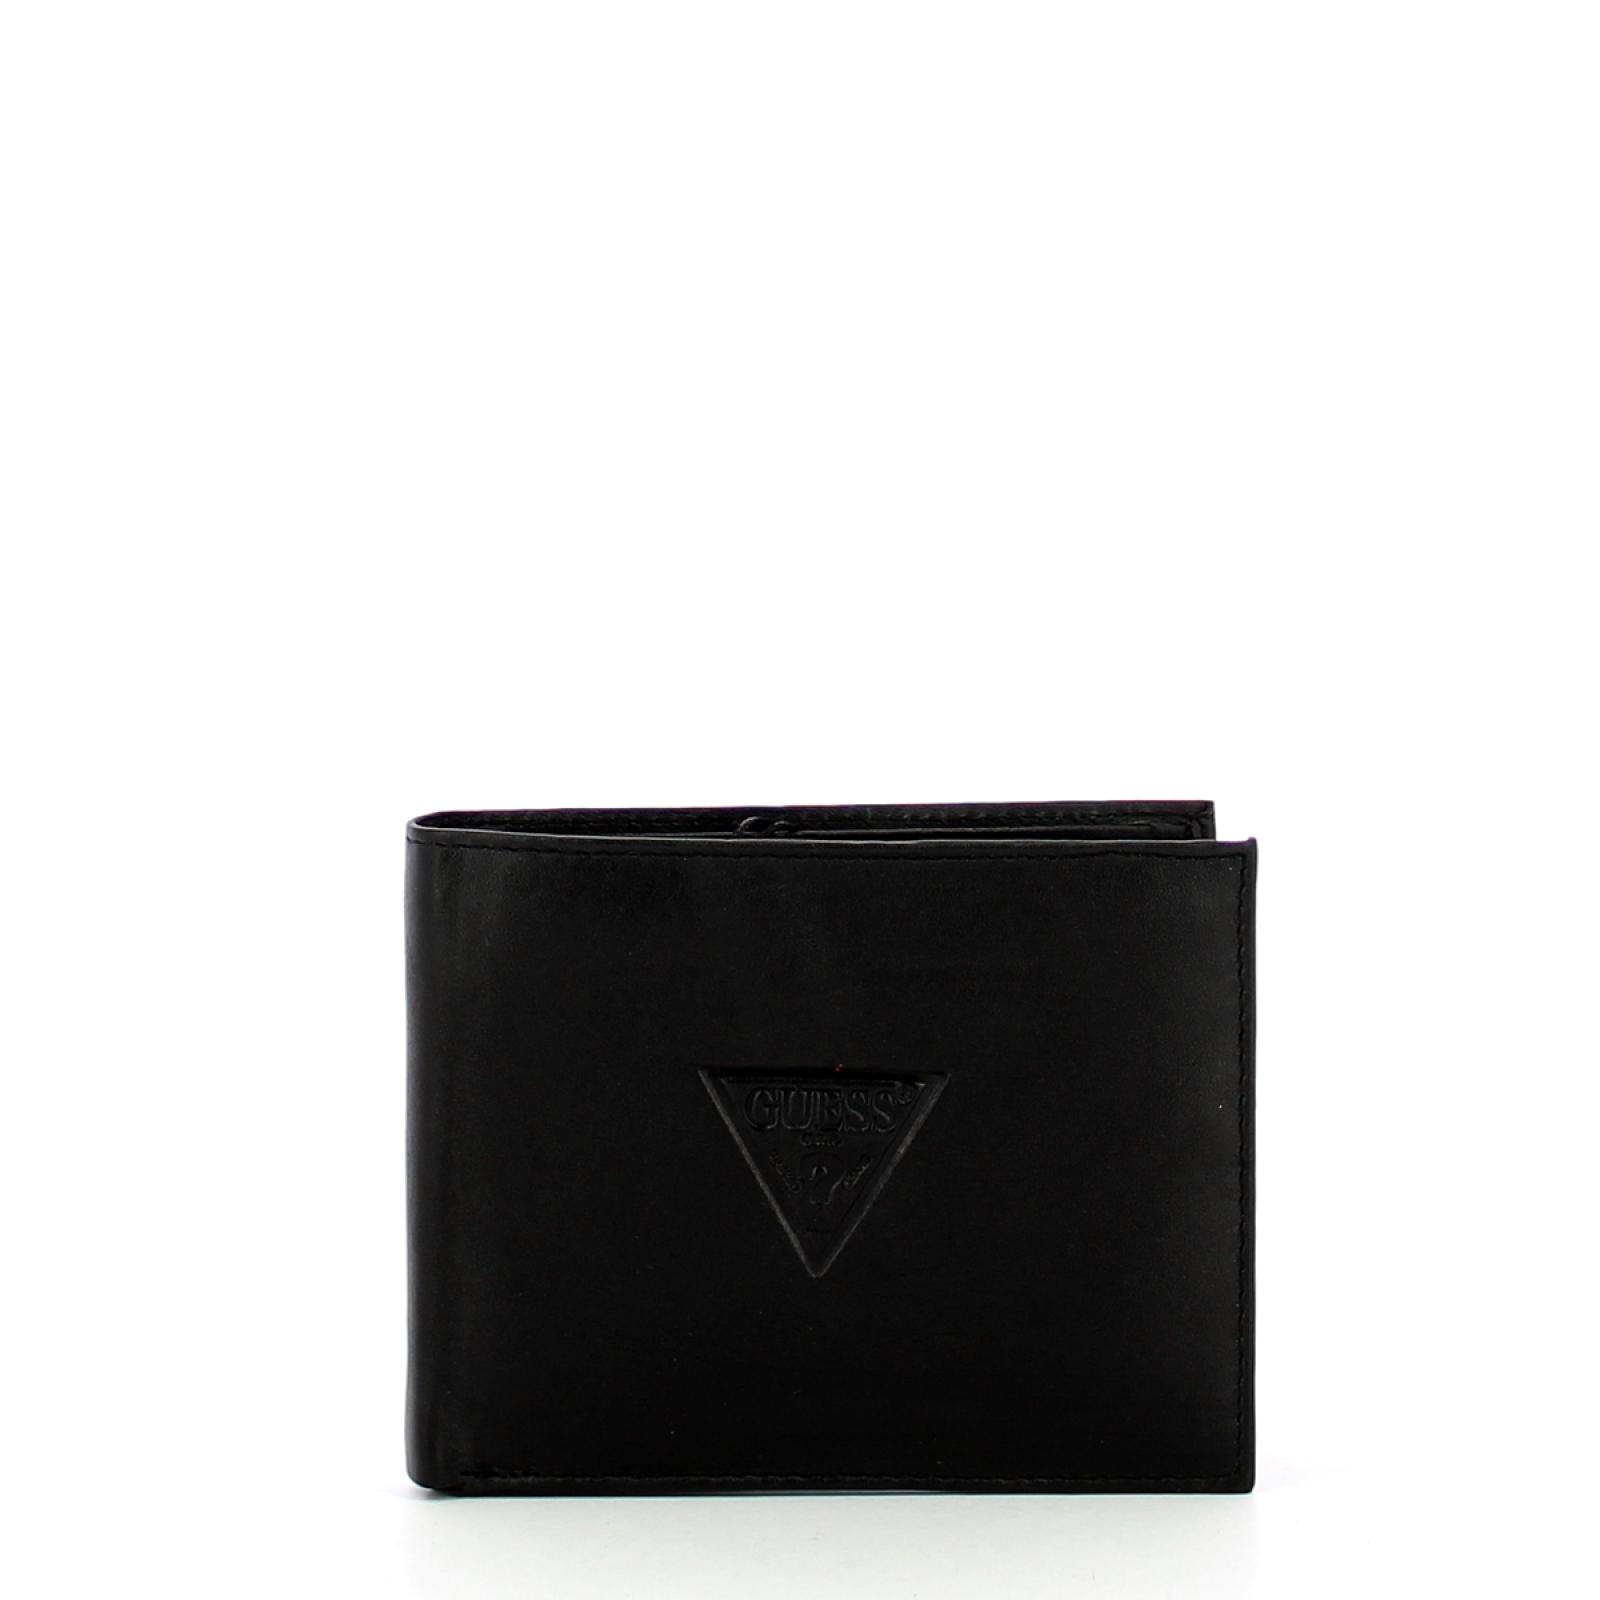 Guess Beaumont leather wallet - 1